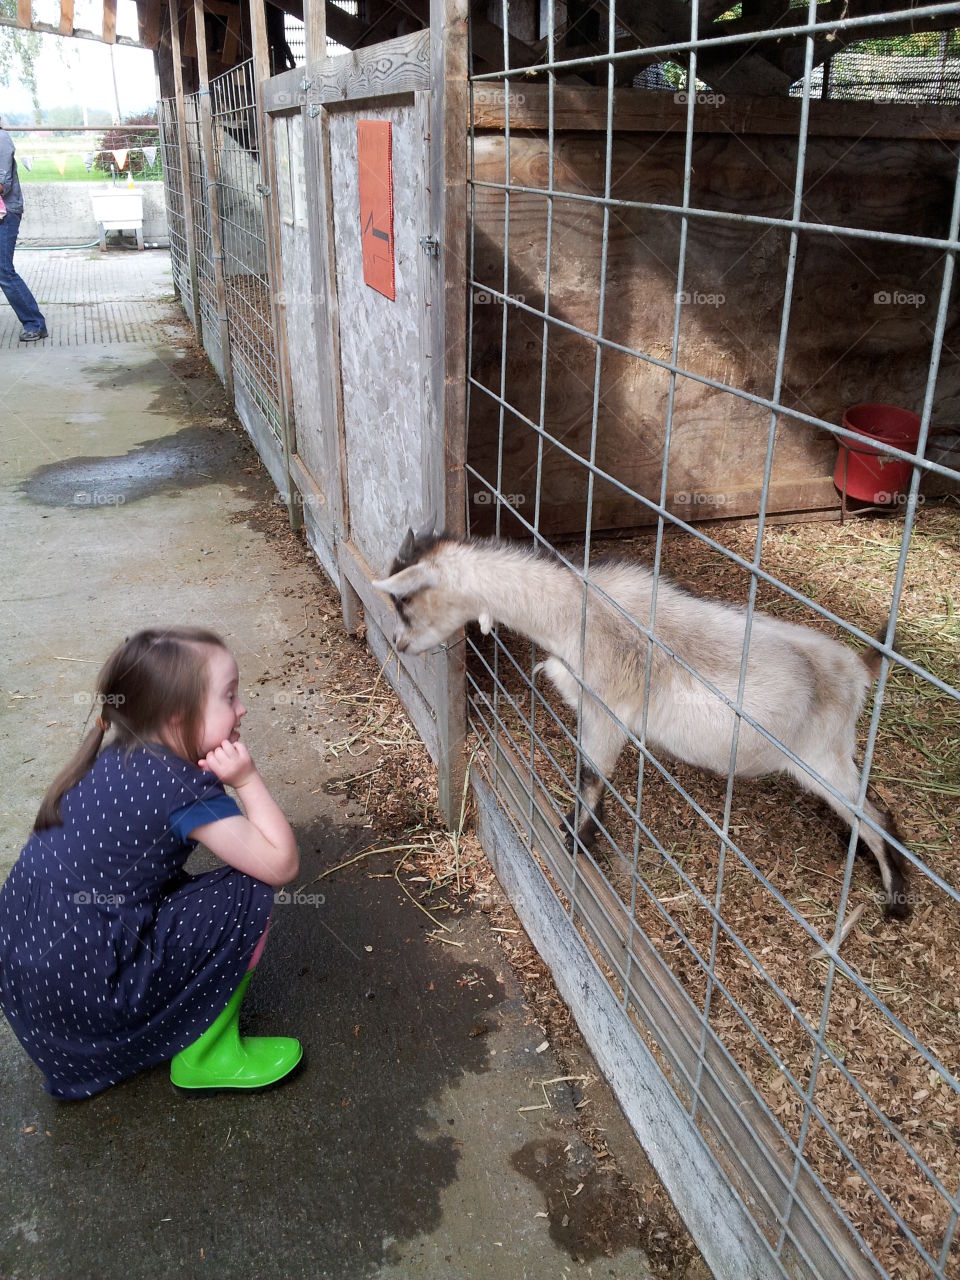 Sarah making a new friend. My daughter at a petting farm